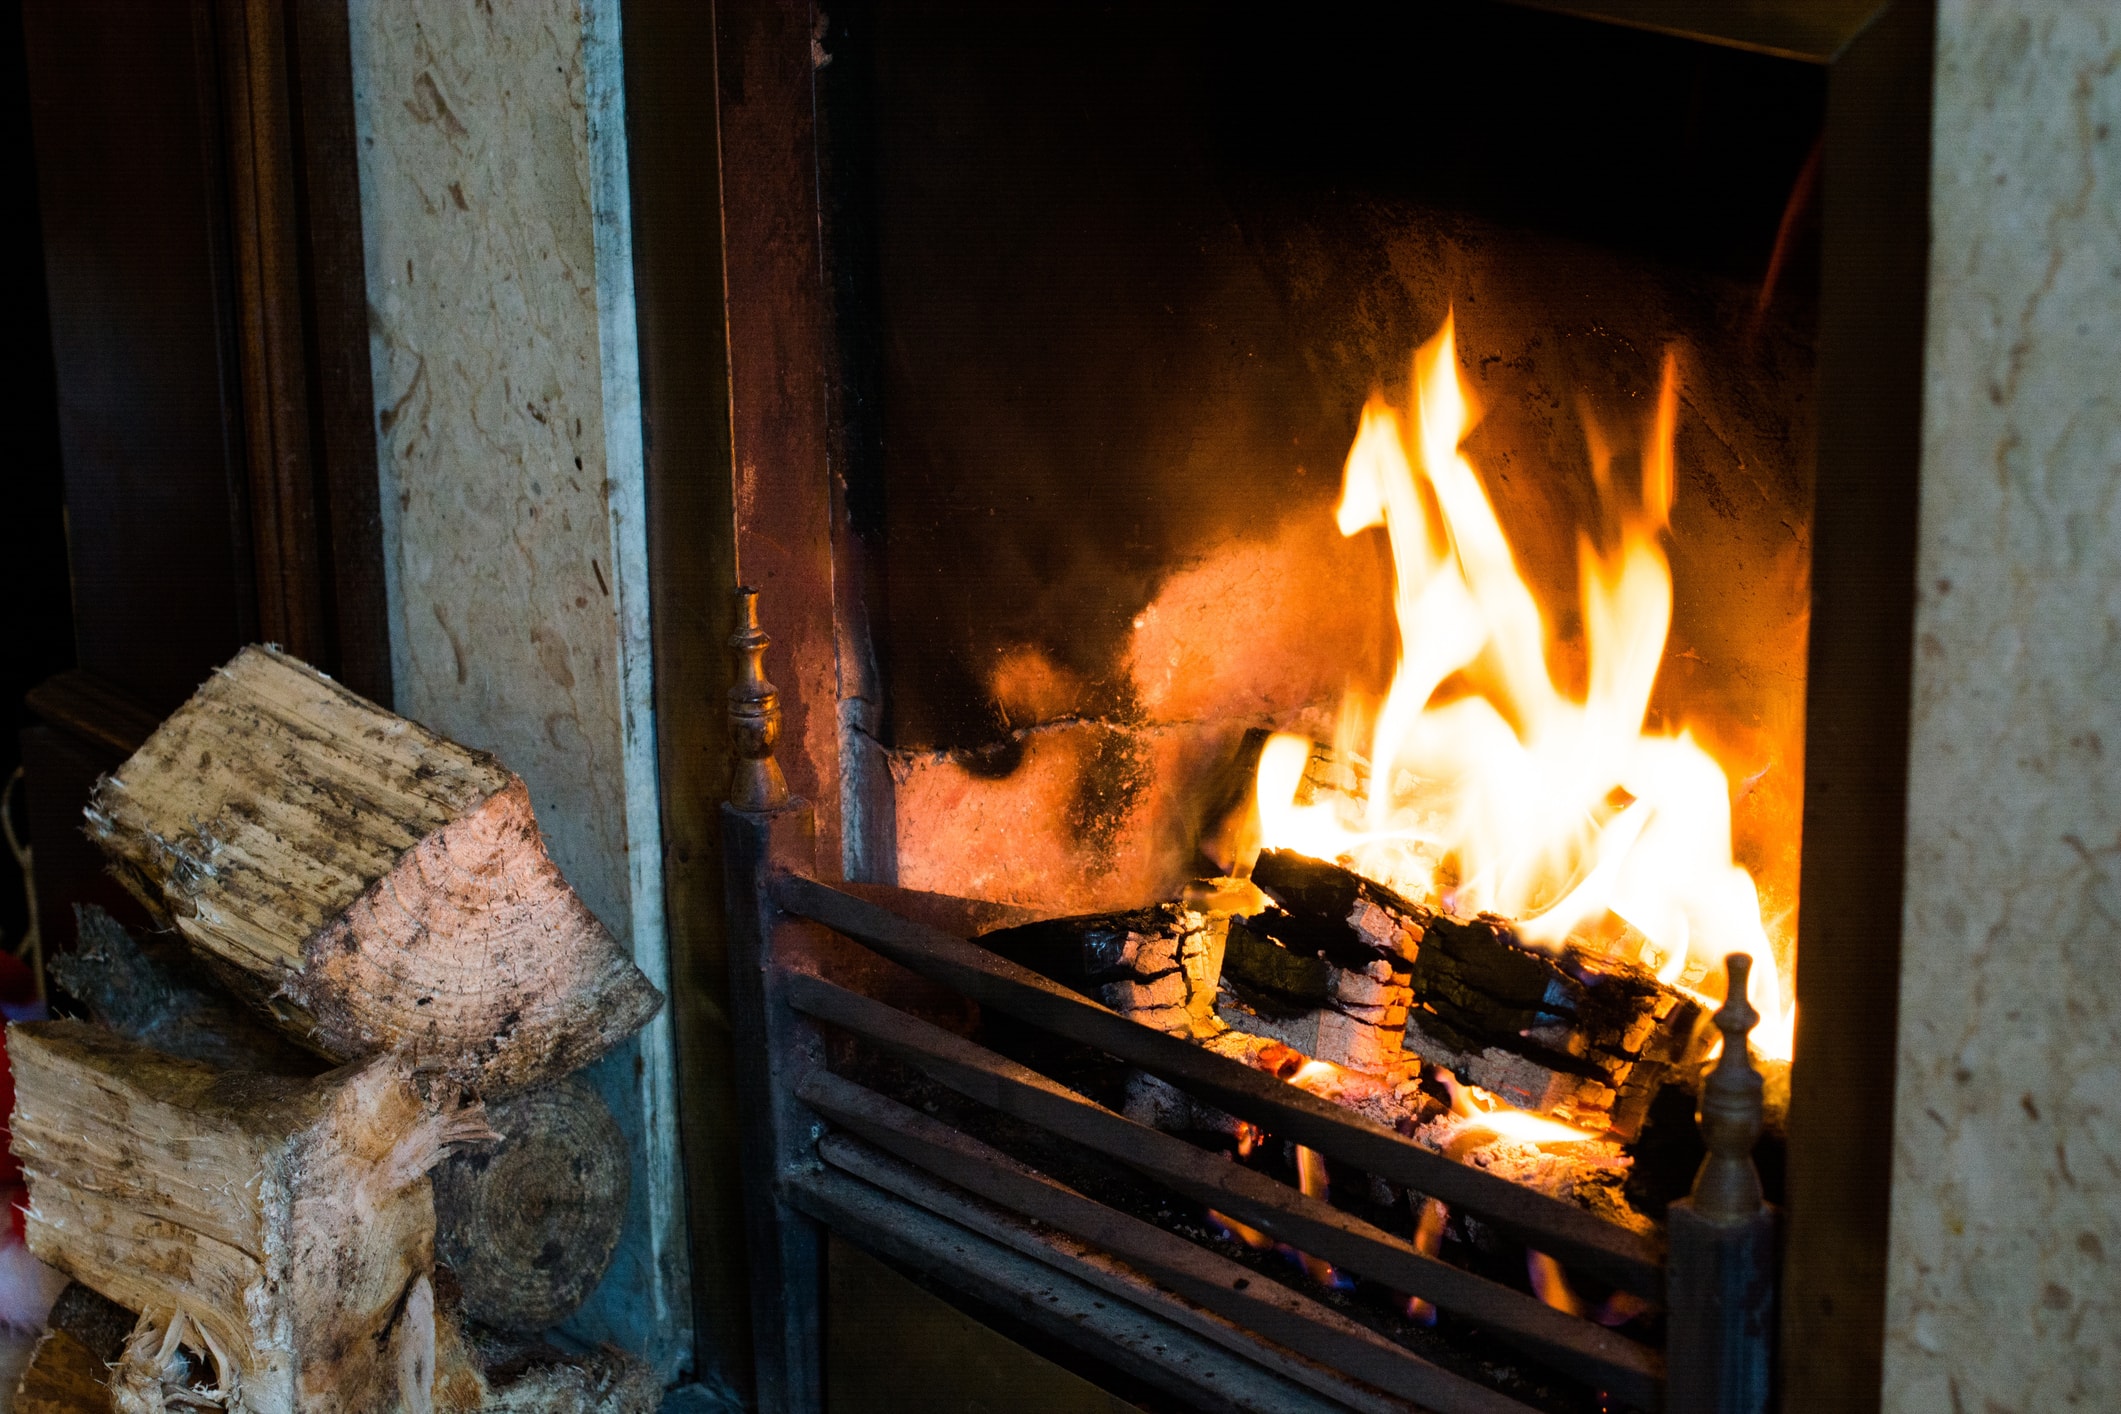 Fireboxes for Wood Burning Fireplaces Awesome Types Of Wood You Should Not Burn In Your Fireplace